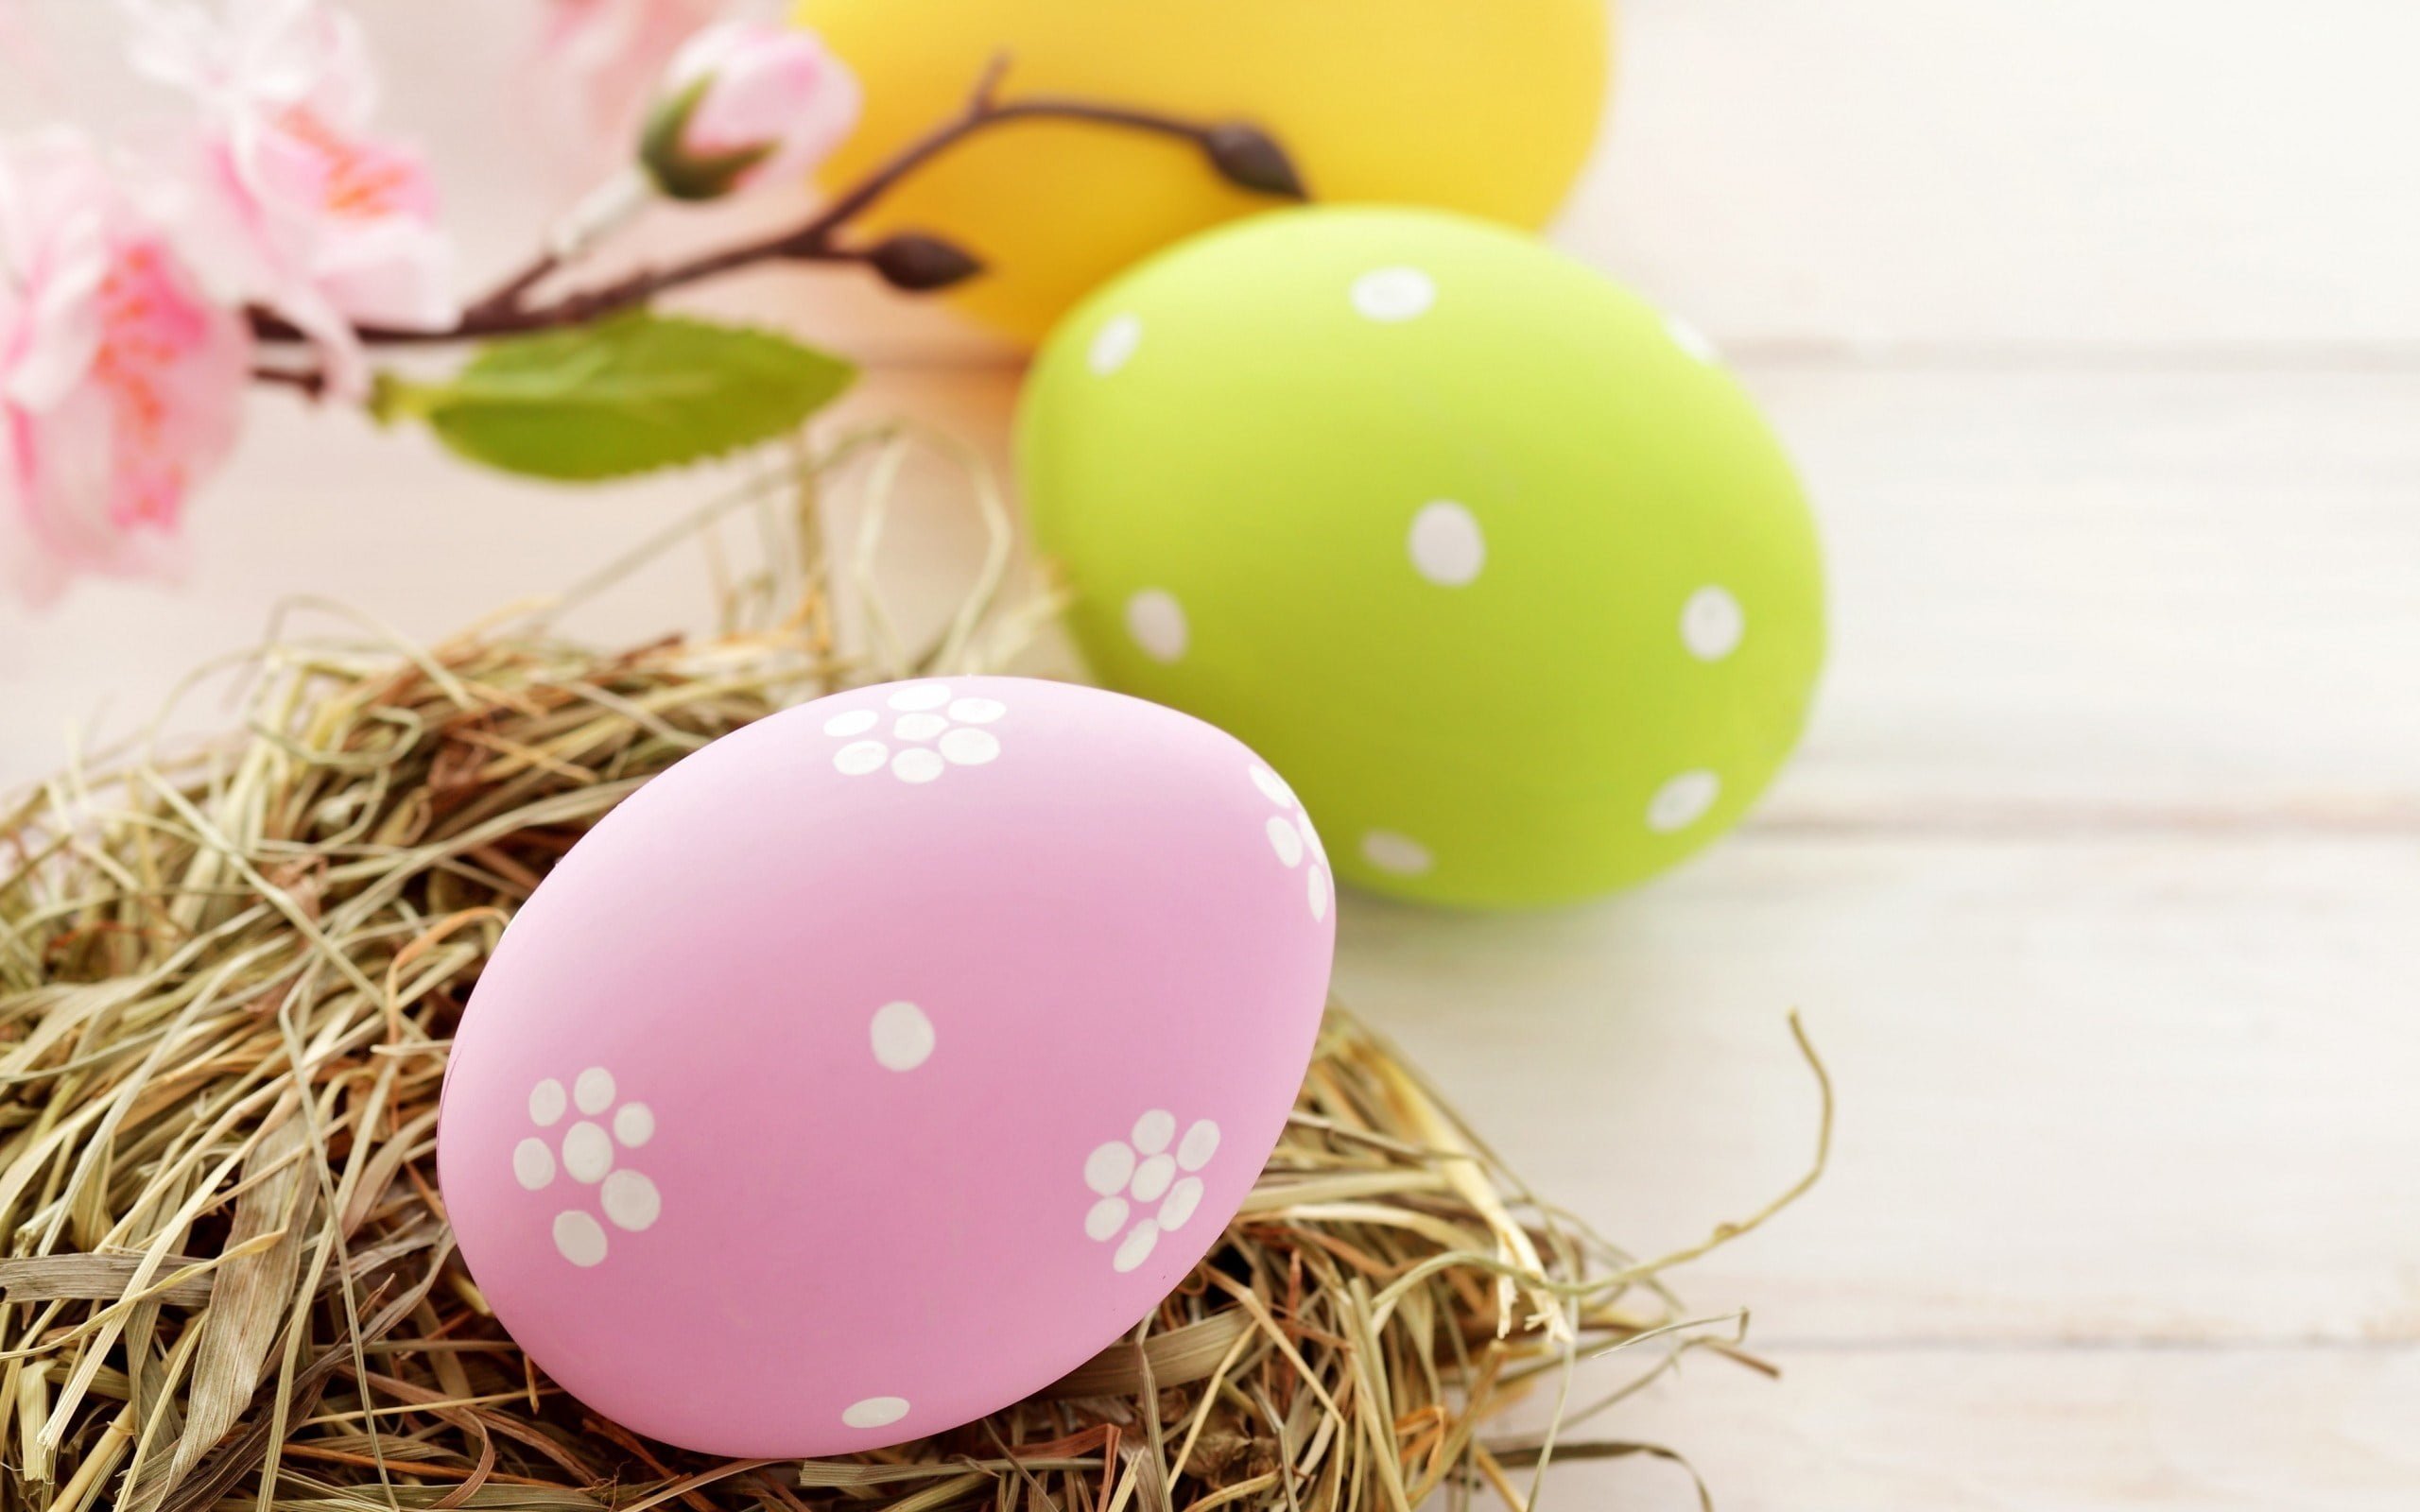 Easter Sunday Eggs Design Images Colorful Pictures Pics Hd